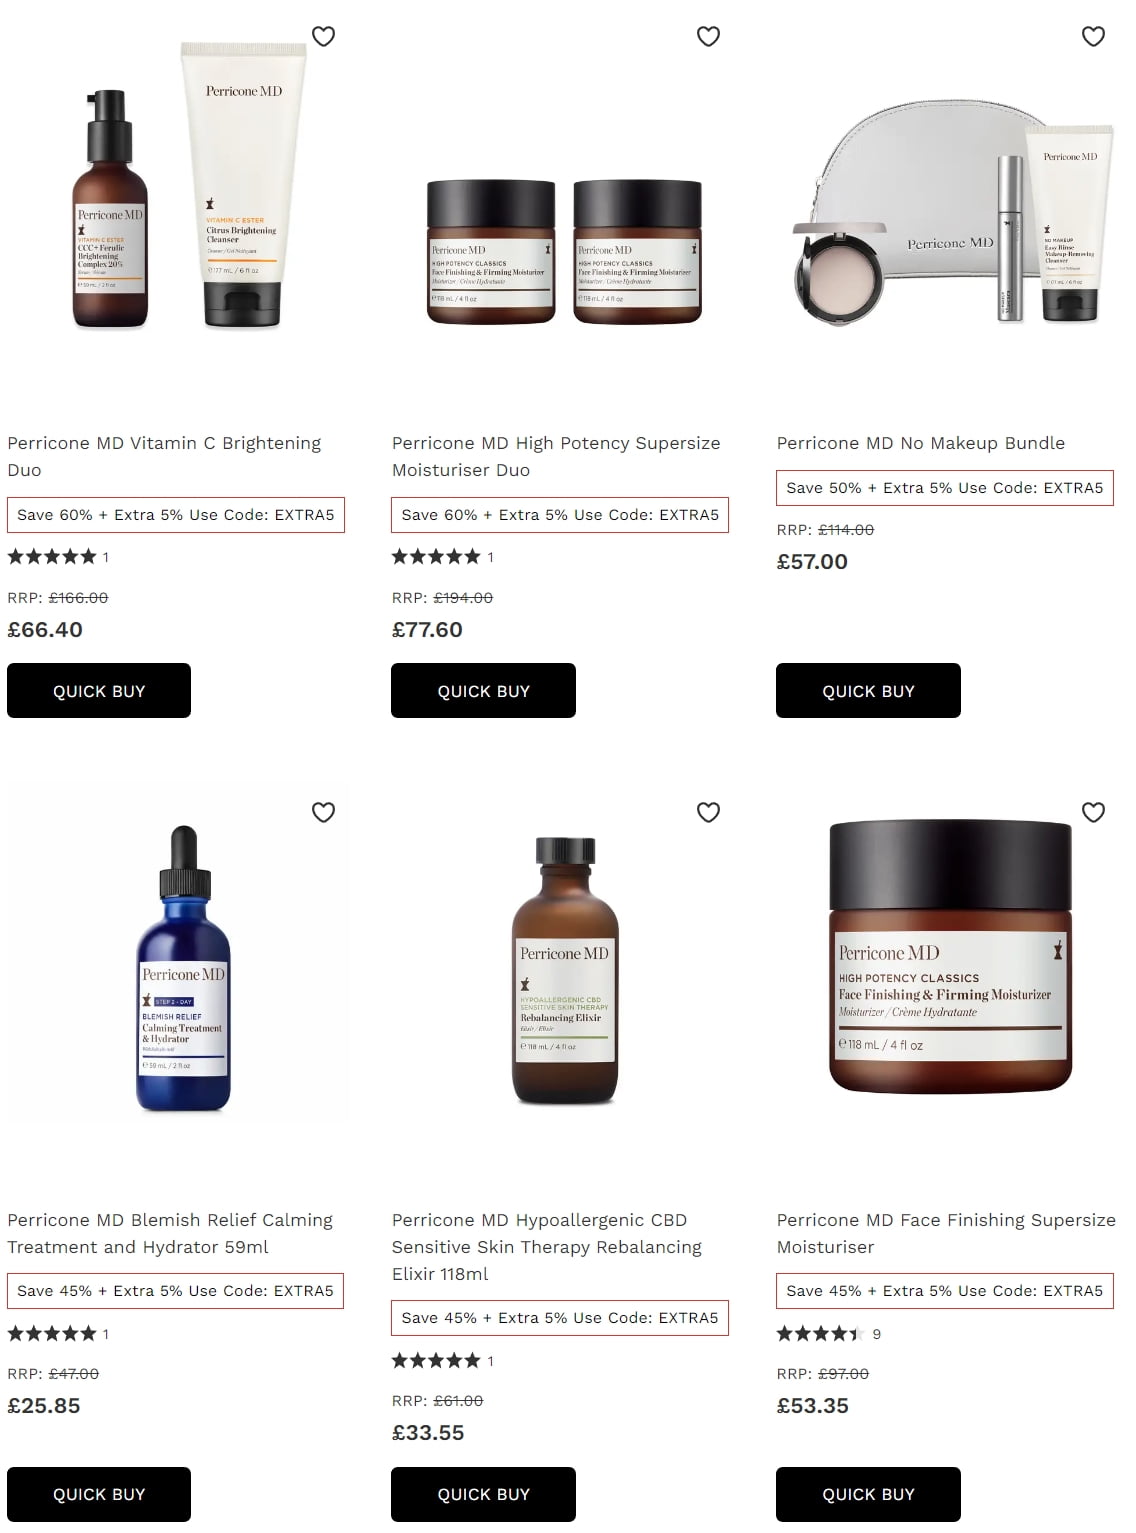 Up to 60% off Perricone MD at Lookfantastic